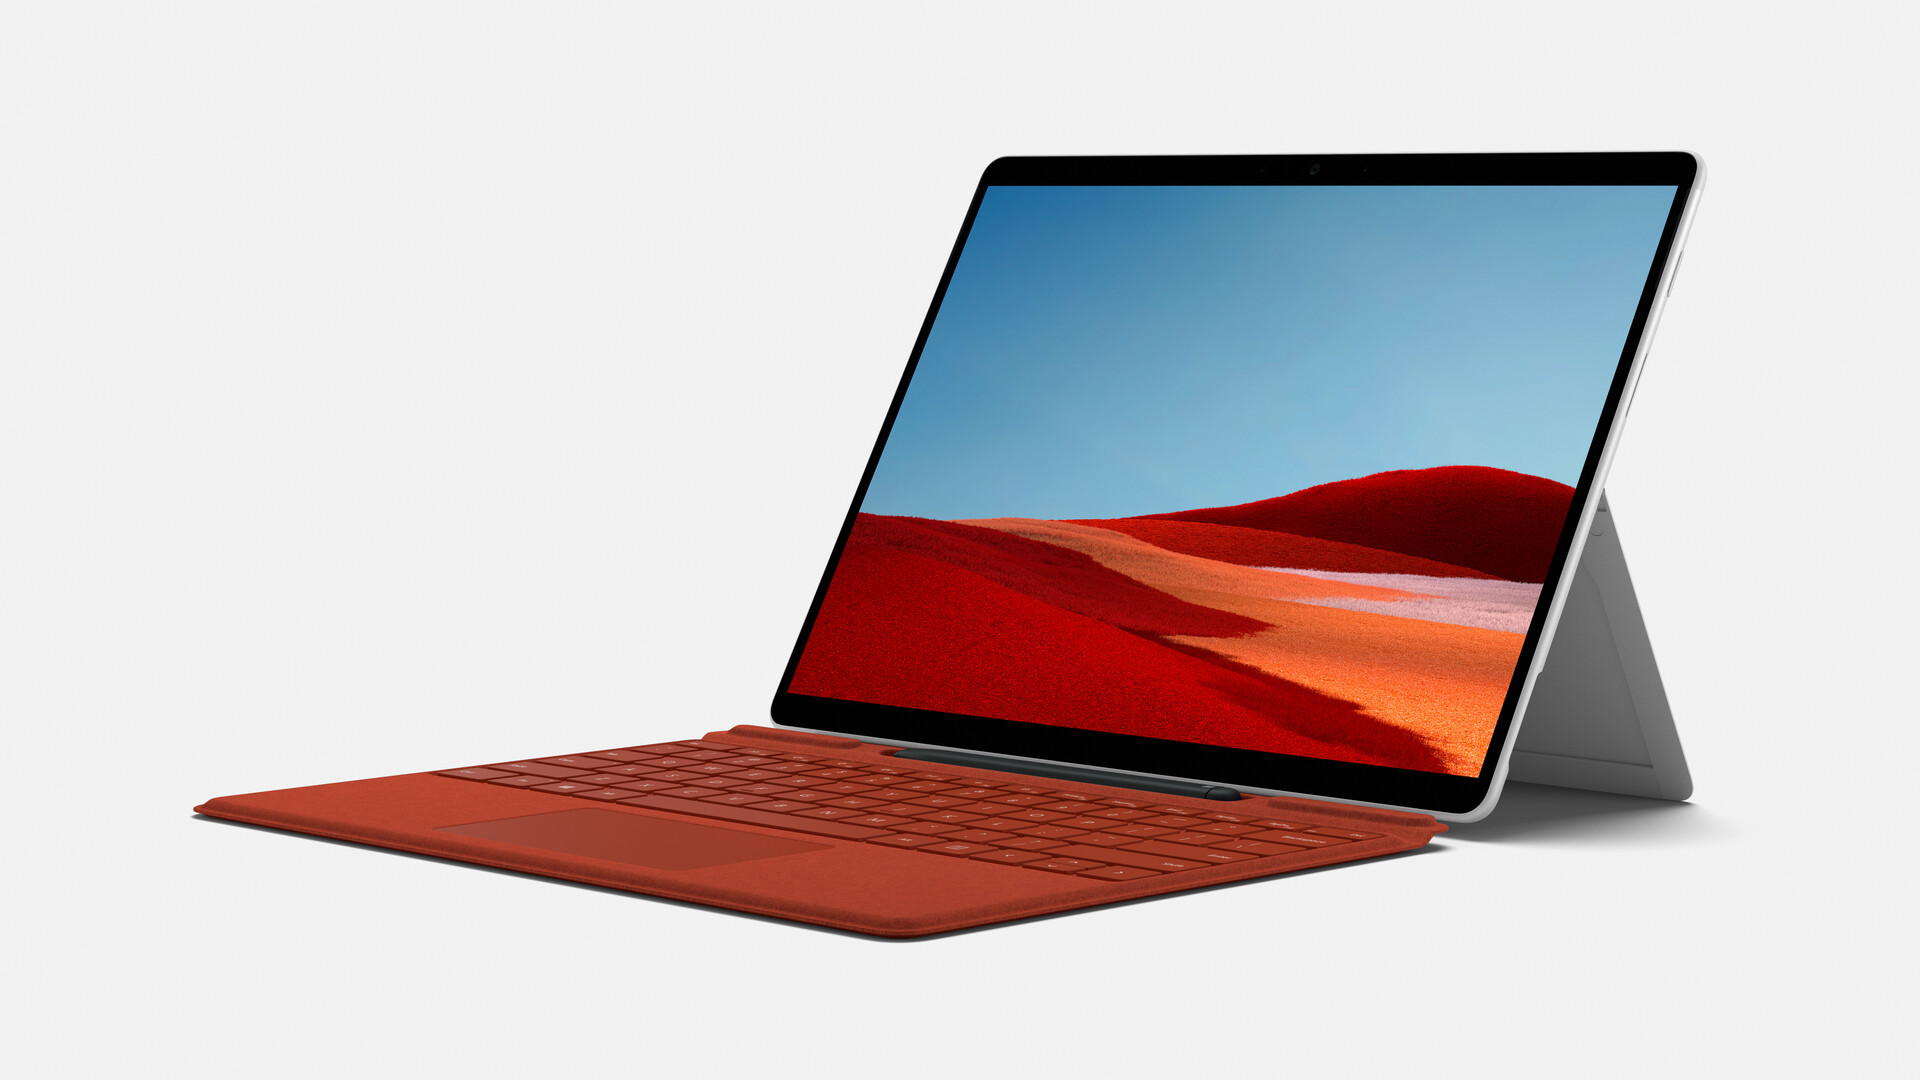 Surface Pro 8 leaked specifications include a 120 Hz display